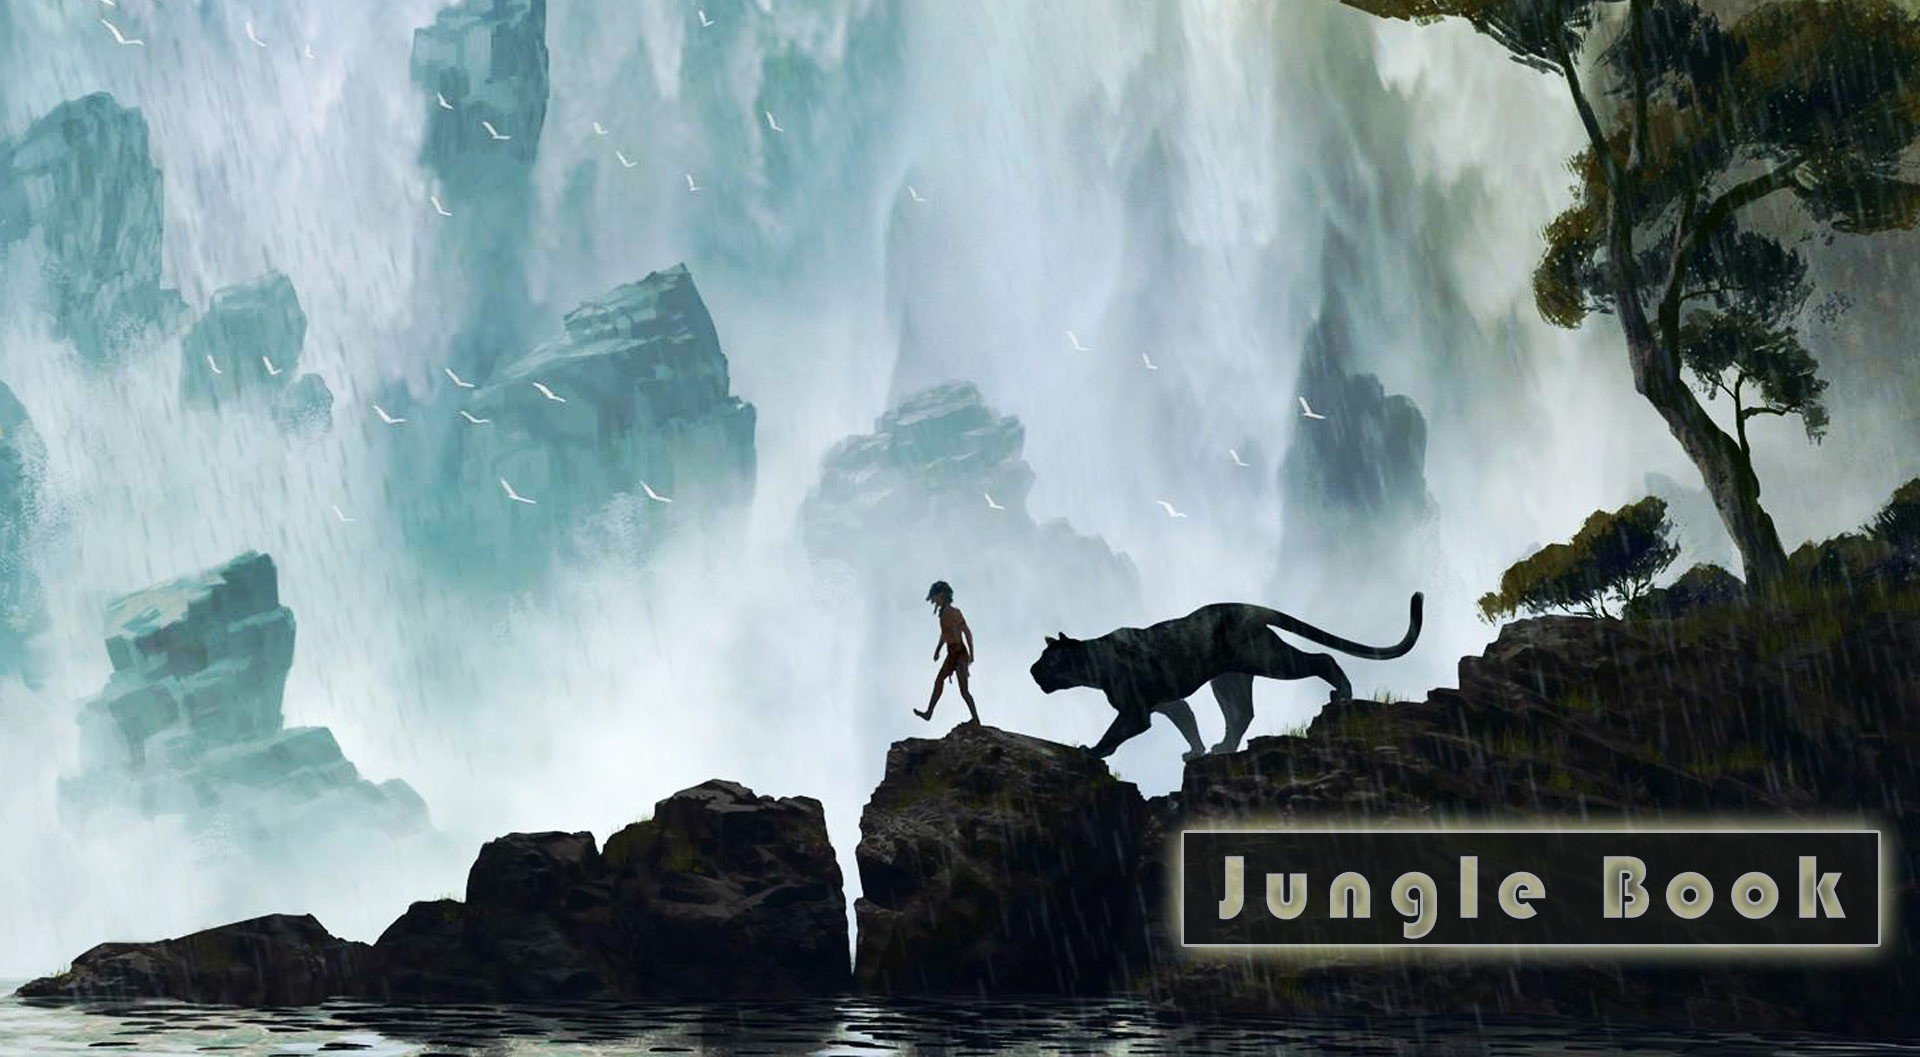 The Jungle Book 2016 Movie HD Wallpaper Search more Hollywood Movies 1920x1057